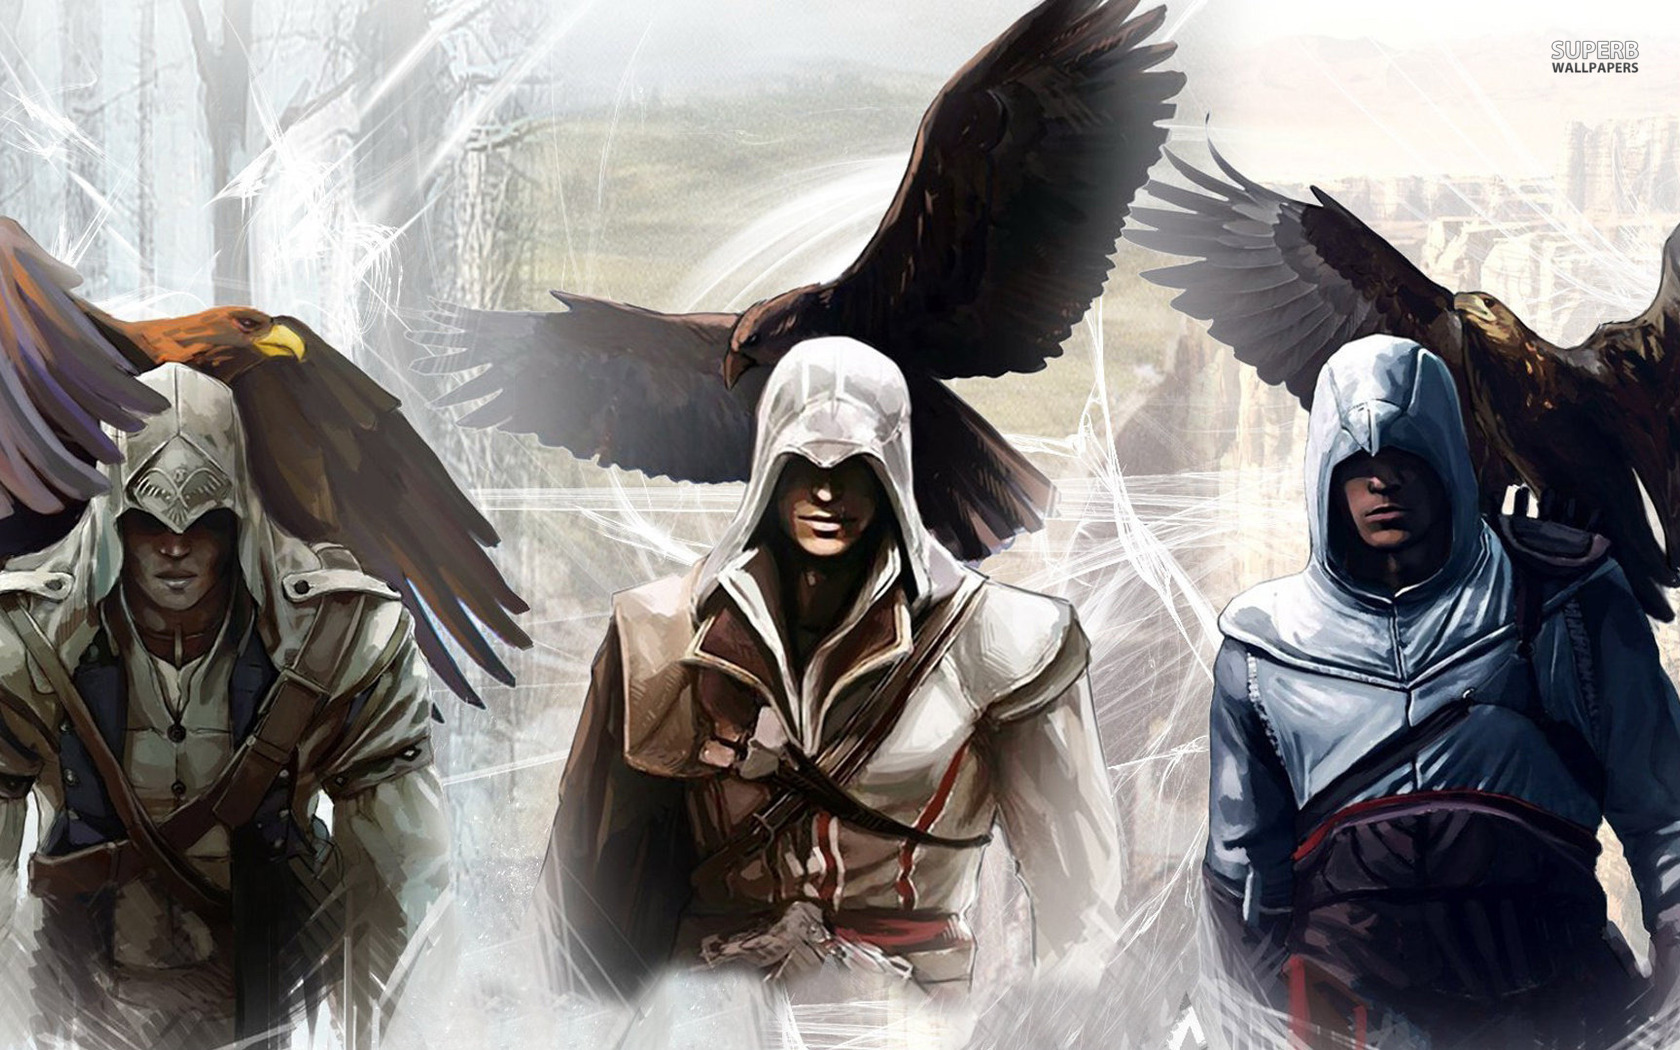 Brotherhood Of The Creed - The Assassin's Wallpaper (35951426 ...